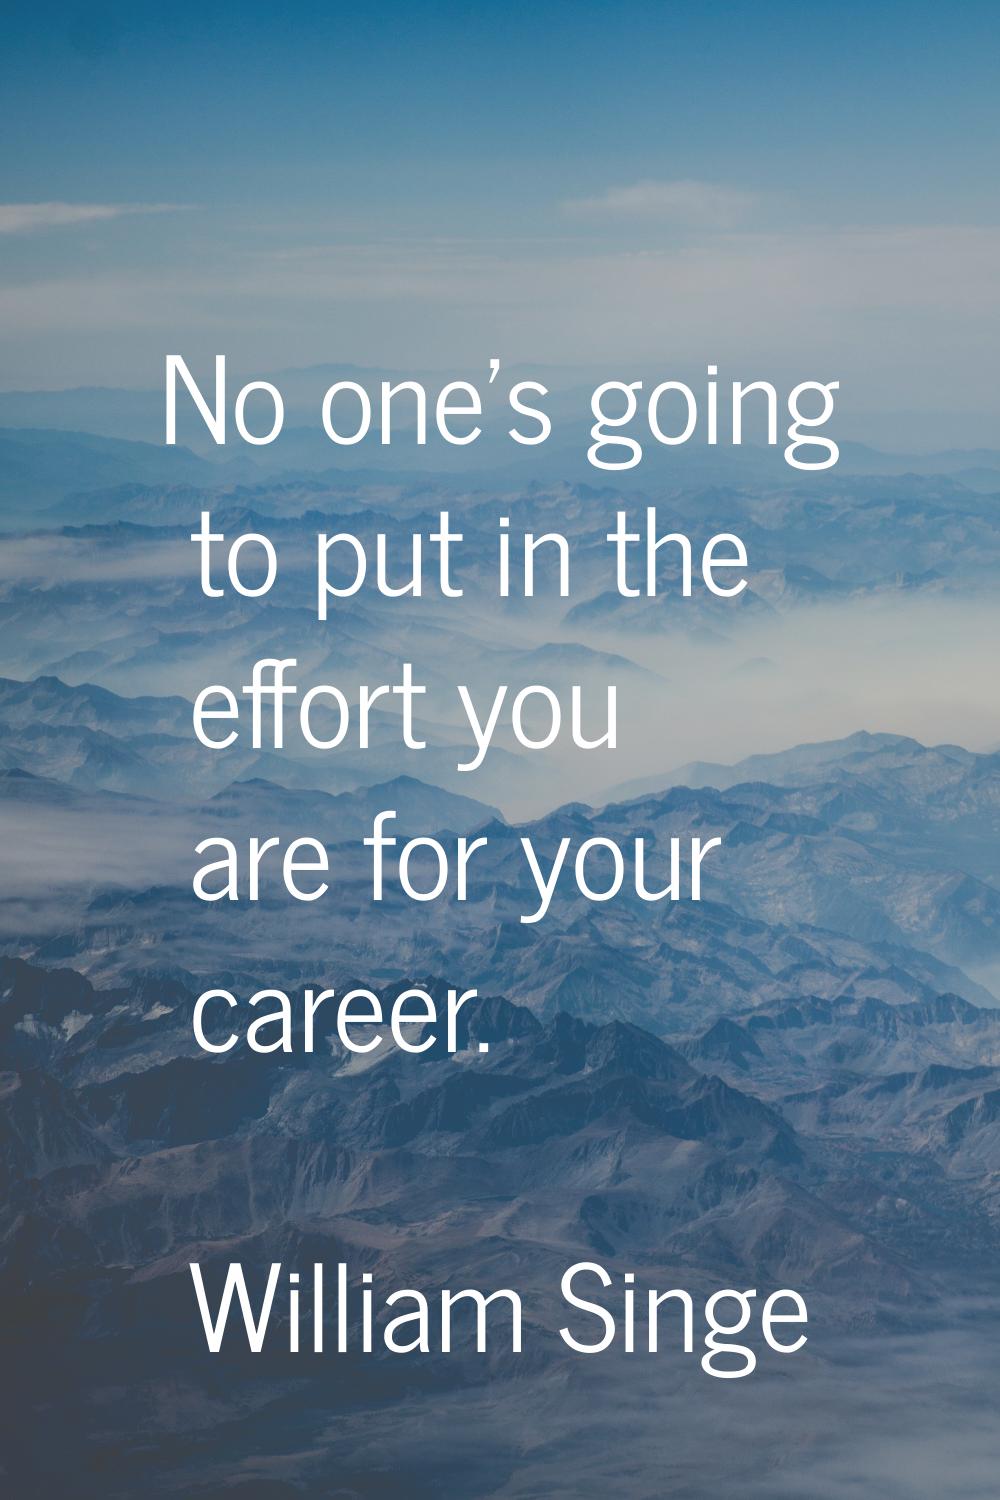 No one's going to put in the effort you are for your career.